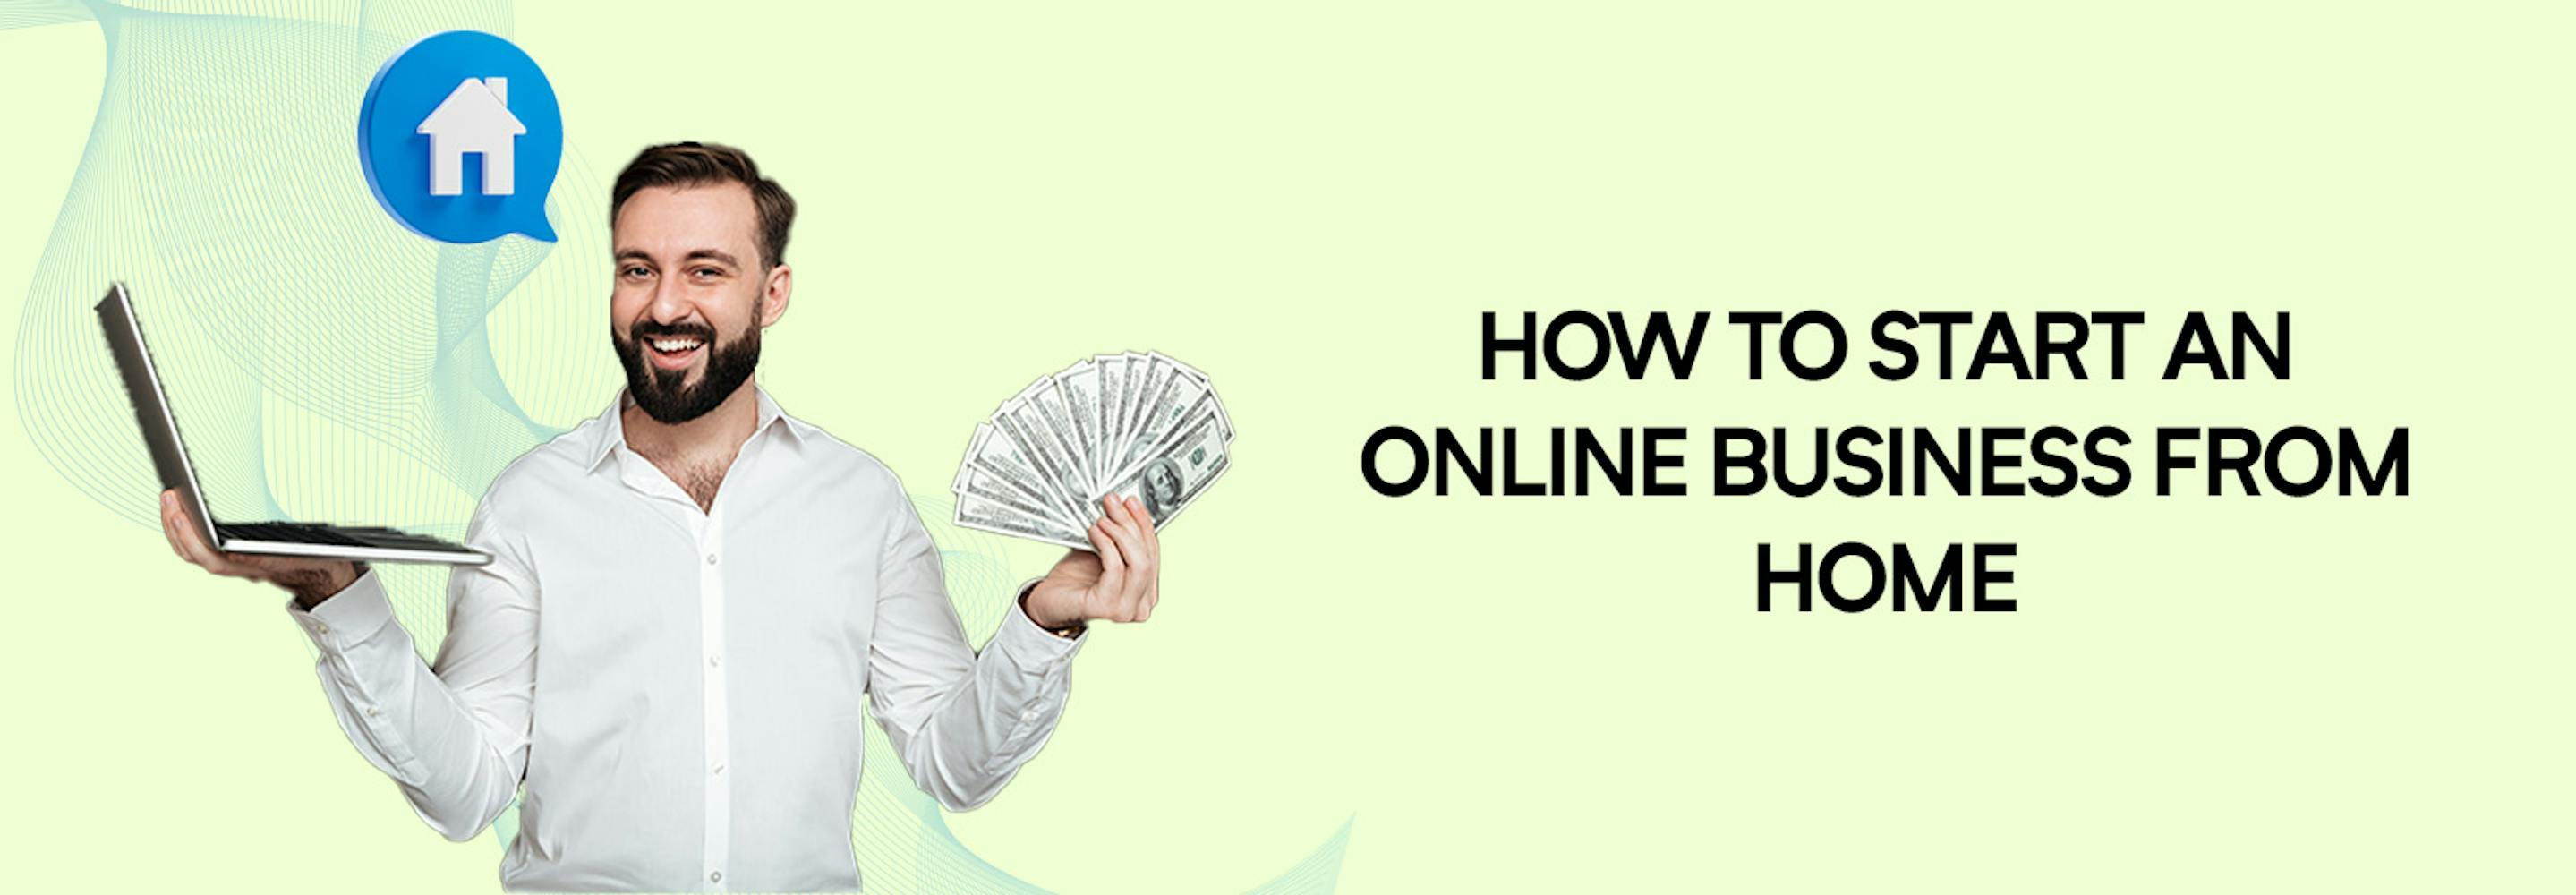 How To Start A Business Online From Home